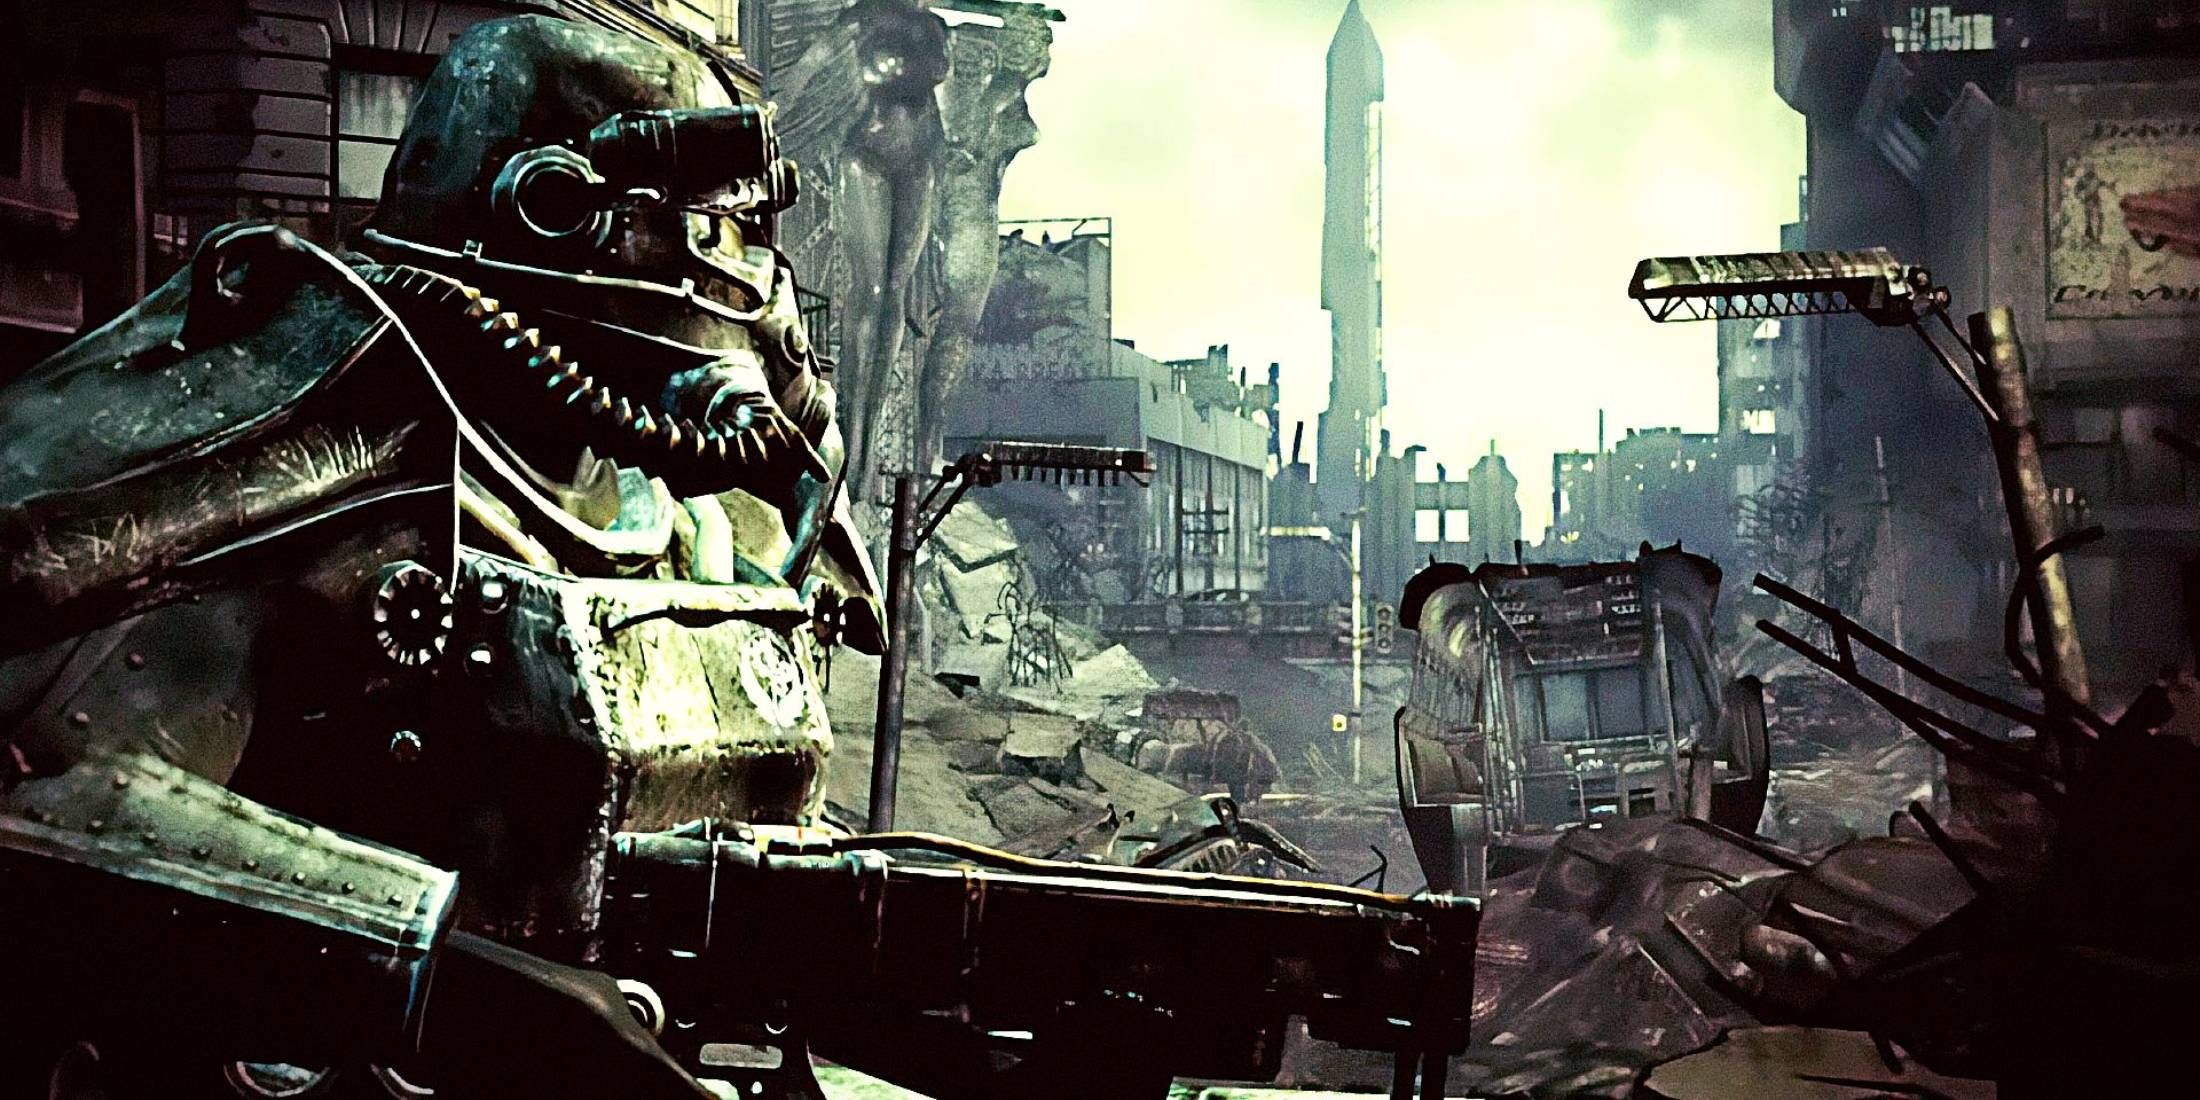 A soldier wearing power armor looking into the distance in Fallout 3's opening